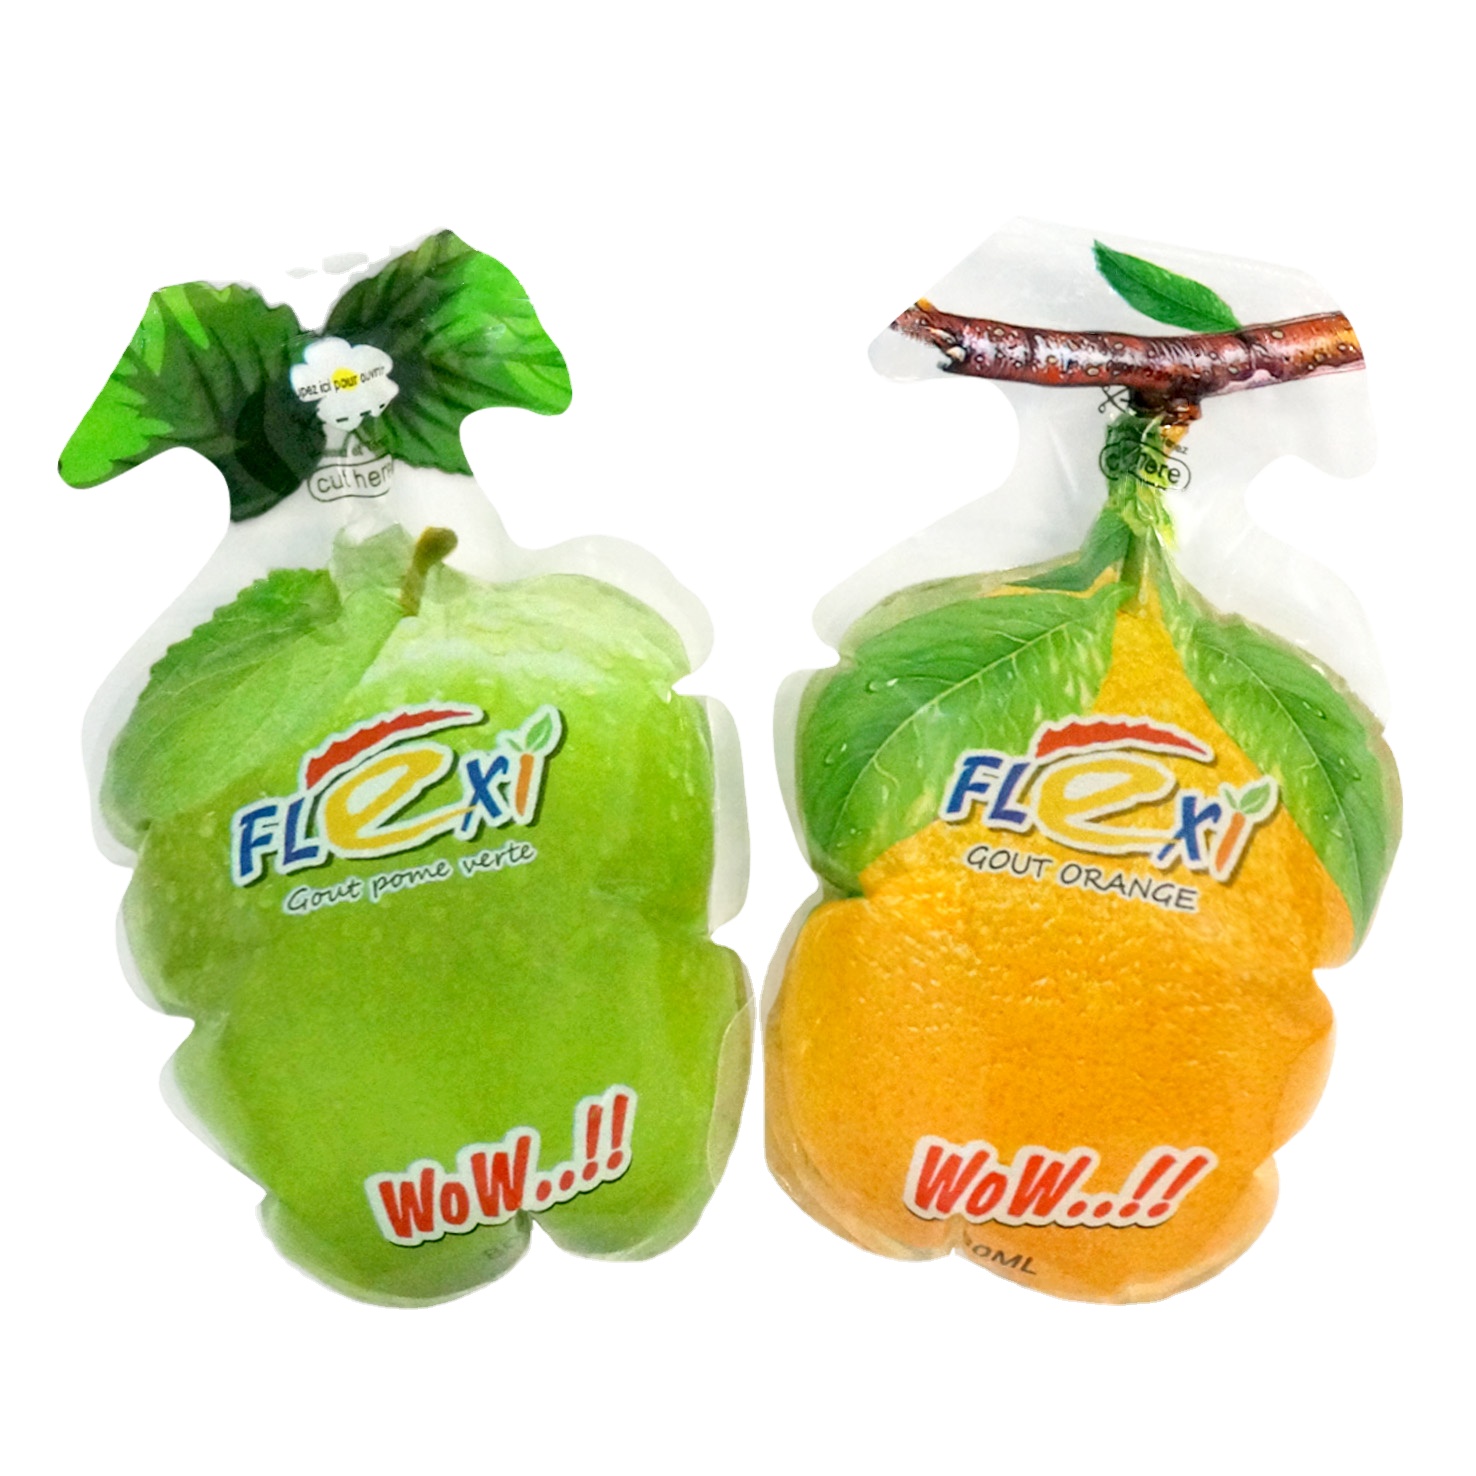 DQ PACK Injection Fruit Juice Pouch Frozen Food Plastic Bottle Shaped Jelly other packaging products Packaging Bag